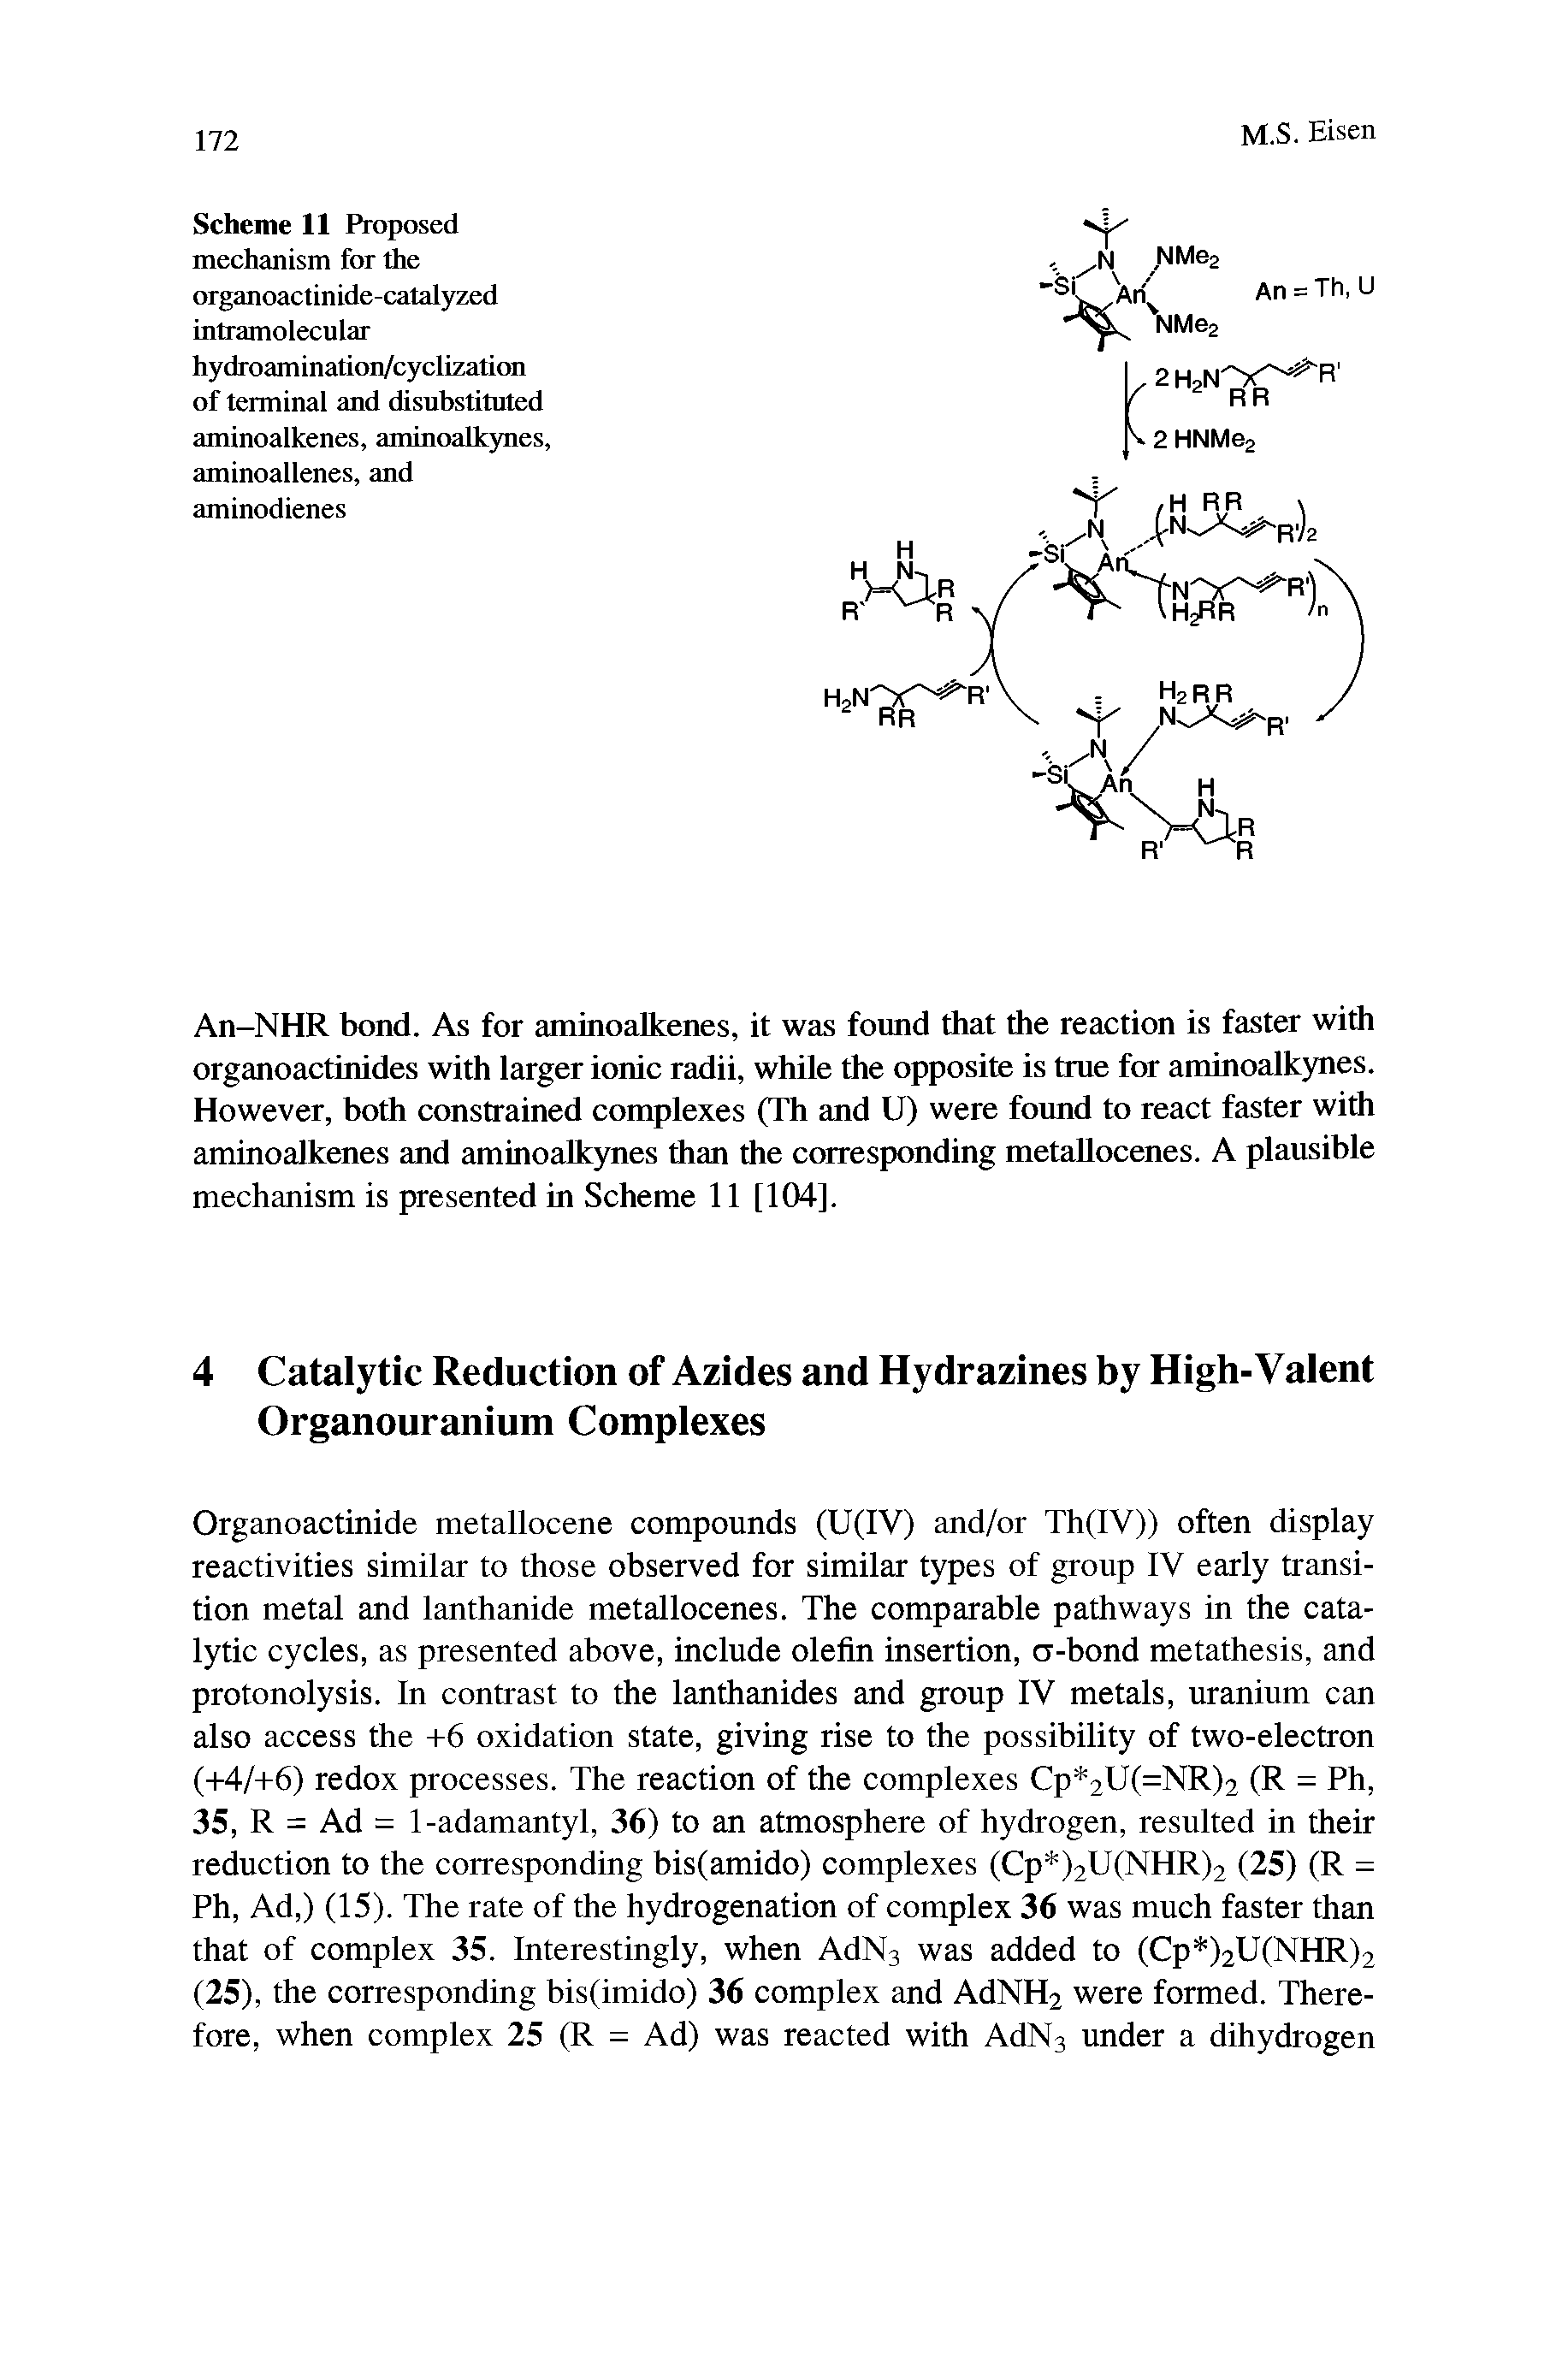 Scheme 11 Proposed mechanism for the organoactinide-catalyzed intramolecular hydroamination/cyclization of terminal and disubstituted aminoalkenes, aminoalkynes, aminoallenes, and aminodienes...